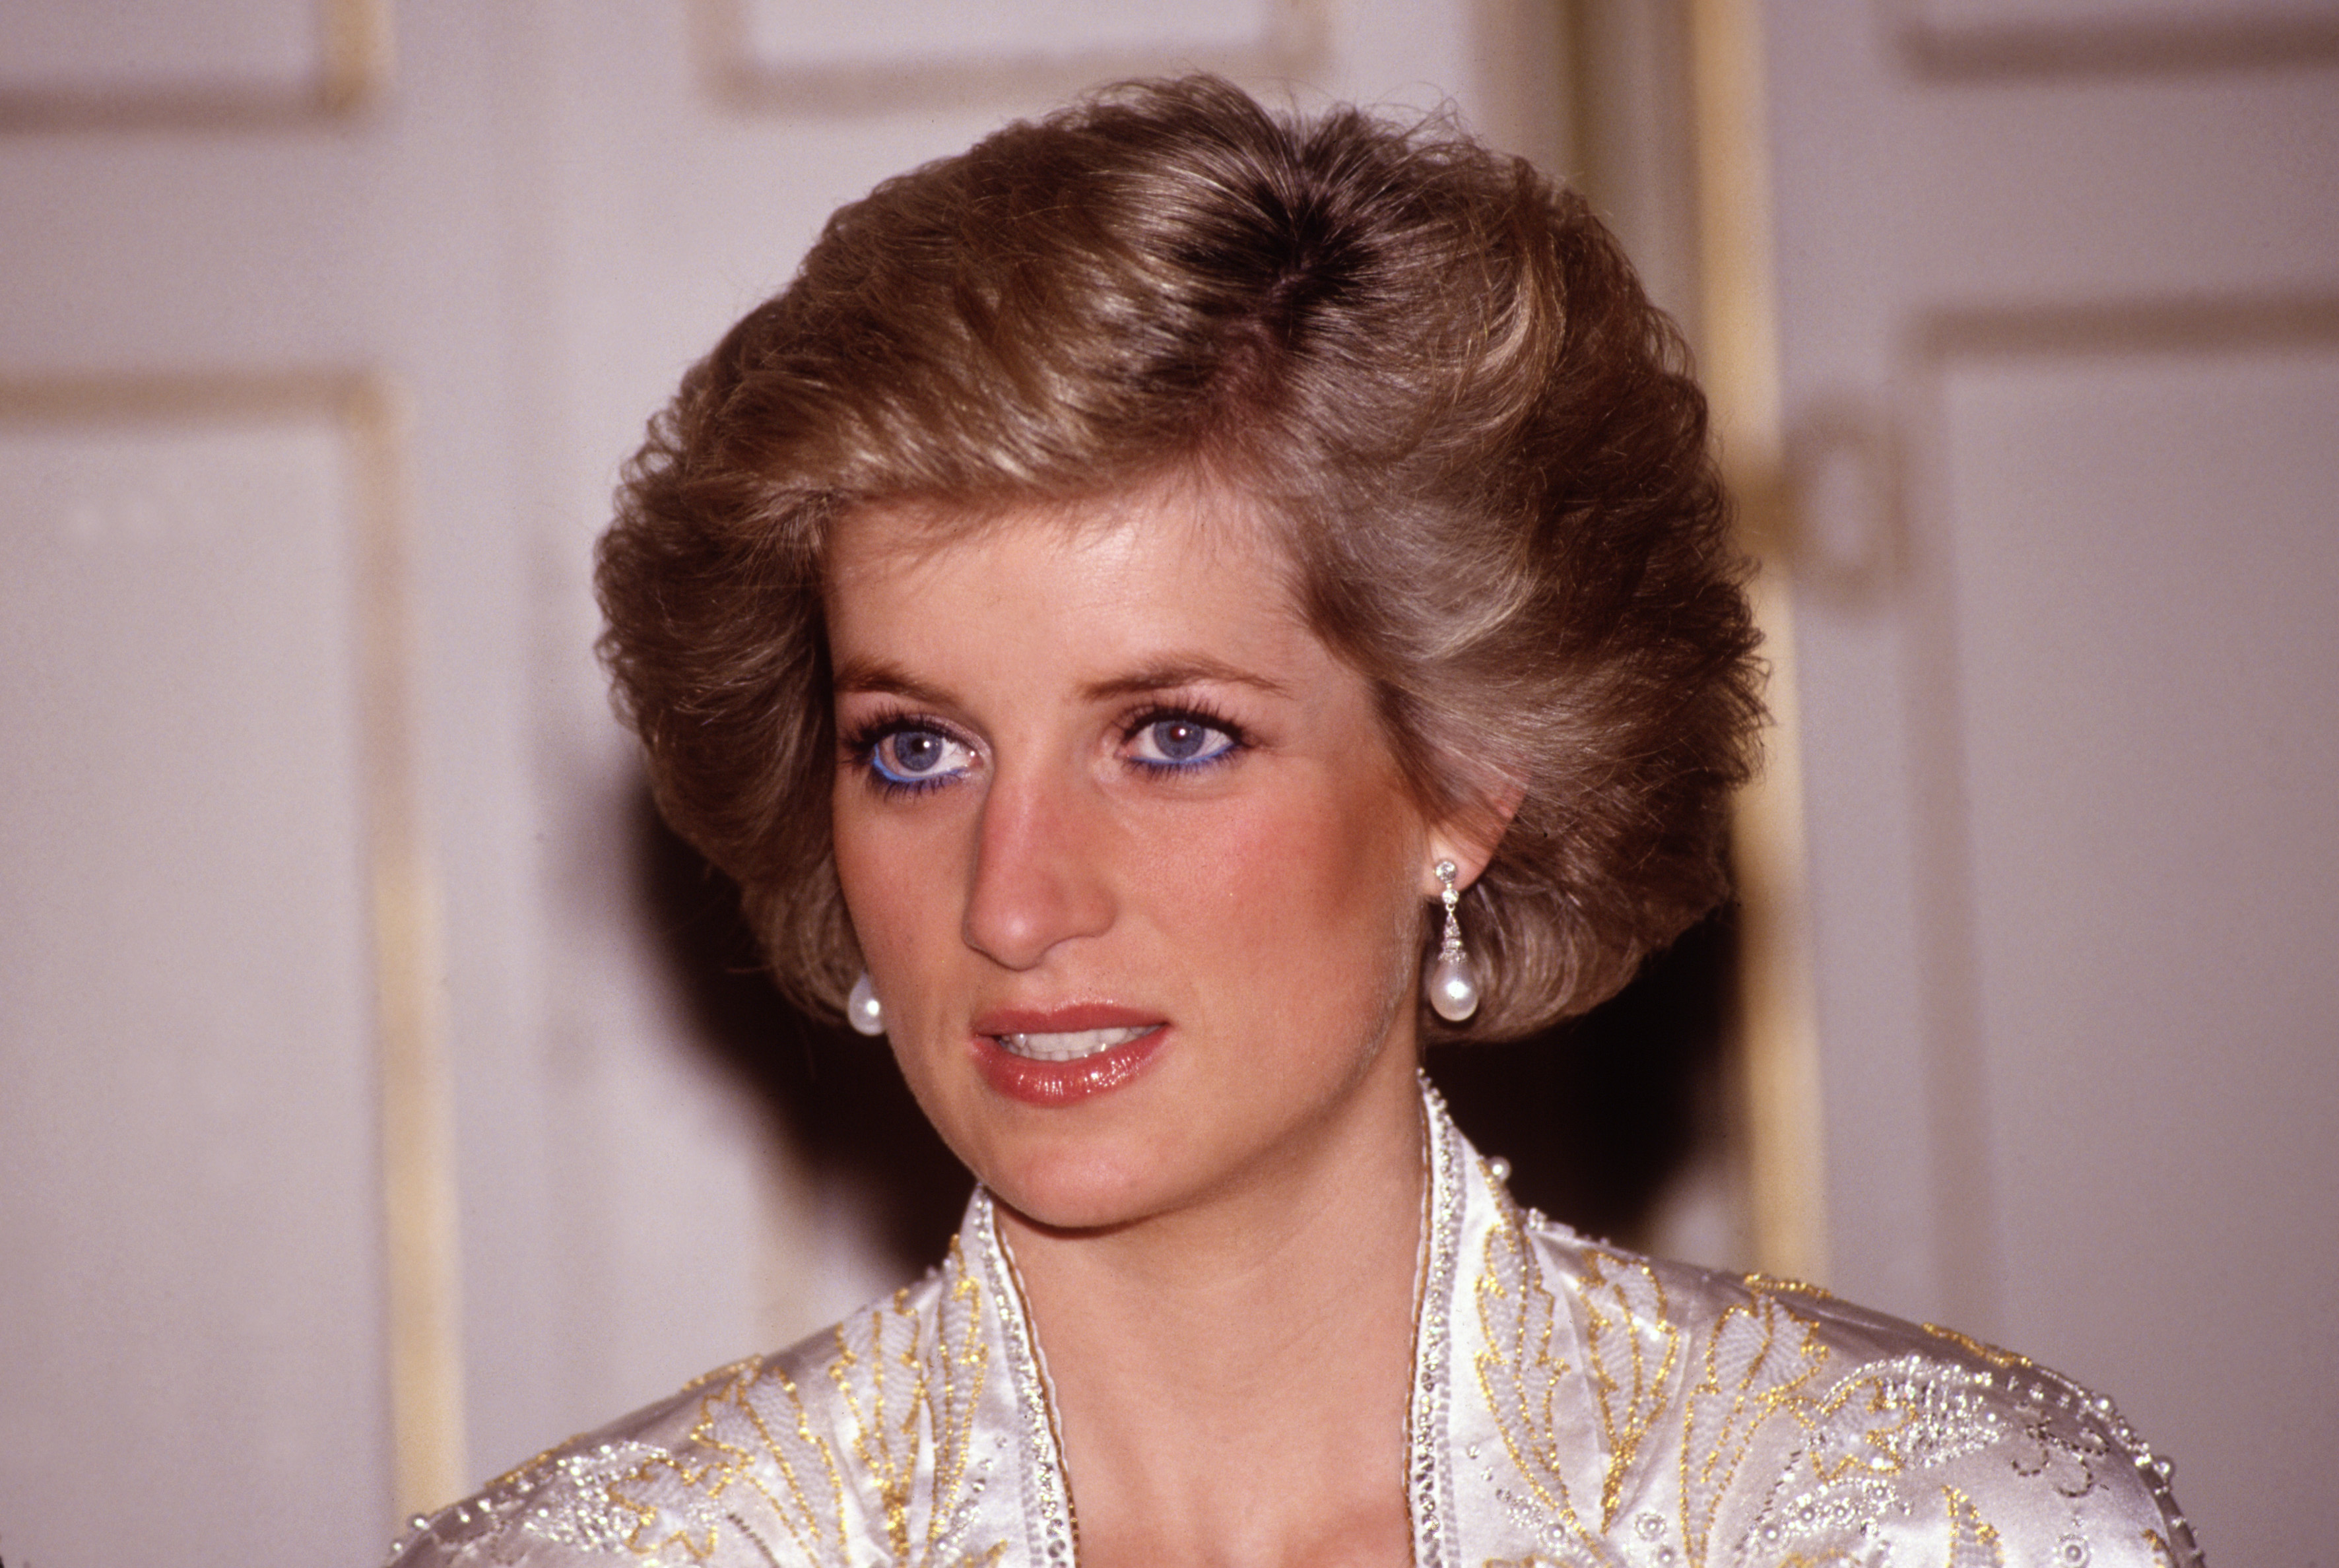 Photo of Princess Diana from the shoulders up at a dinner reception in Paris